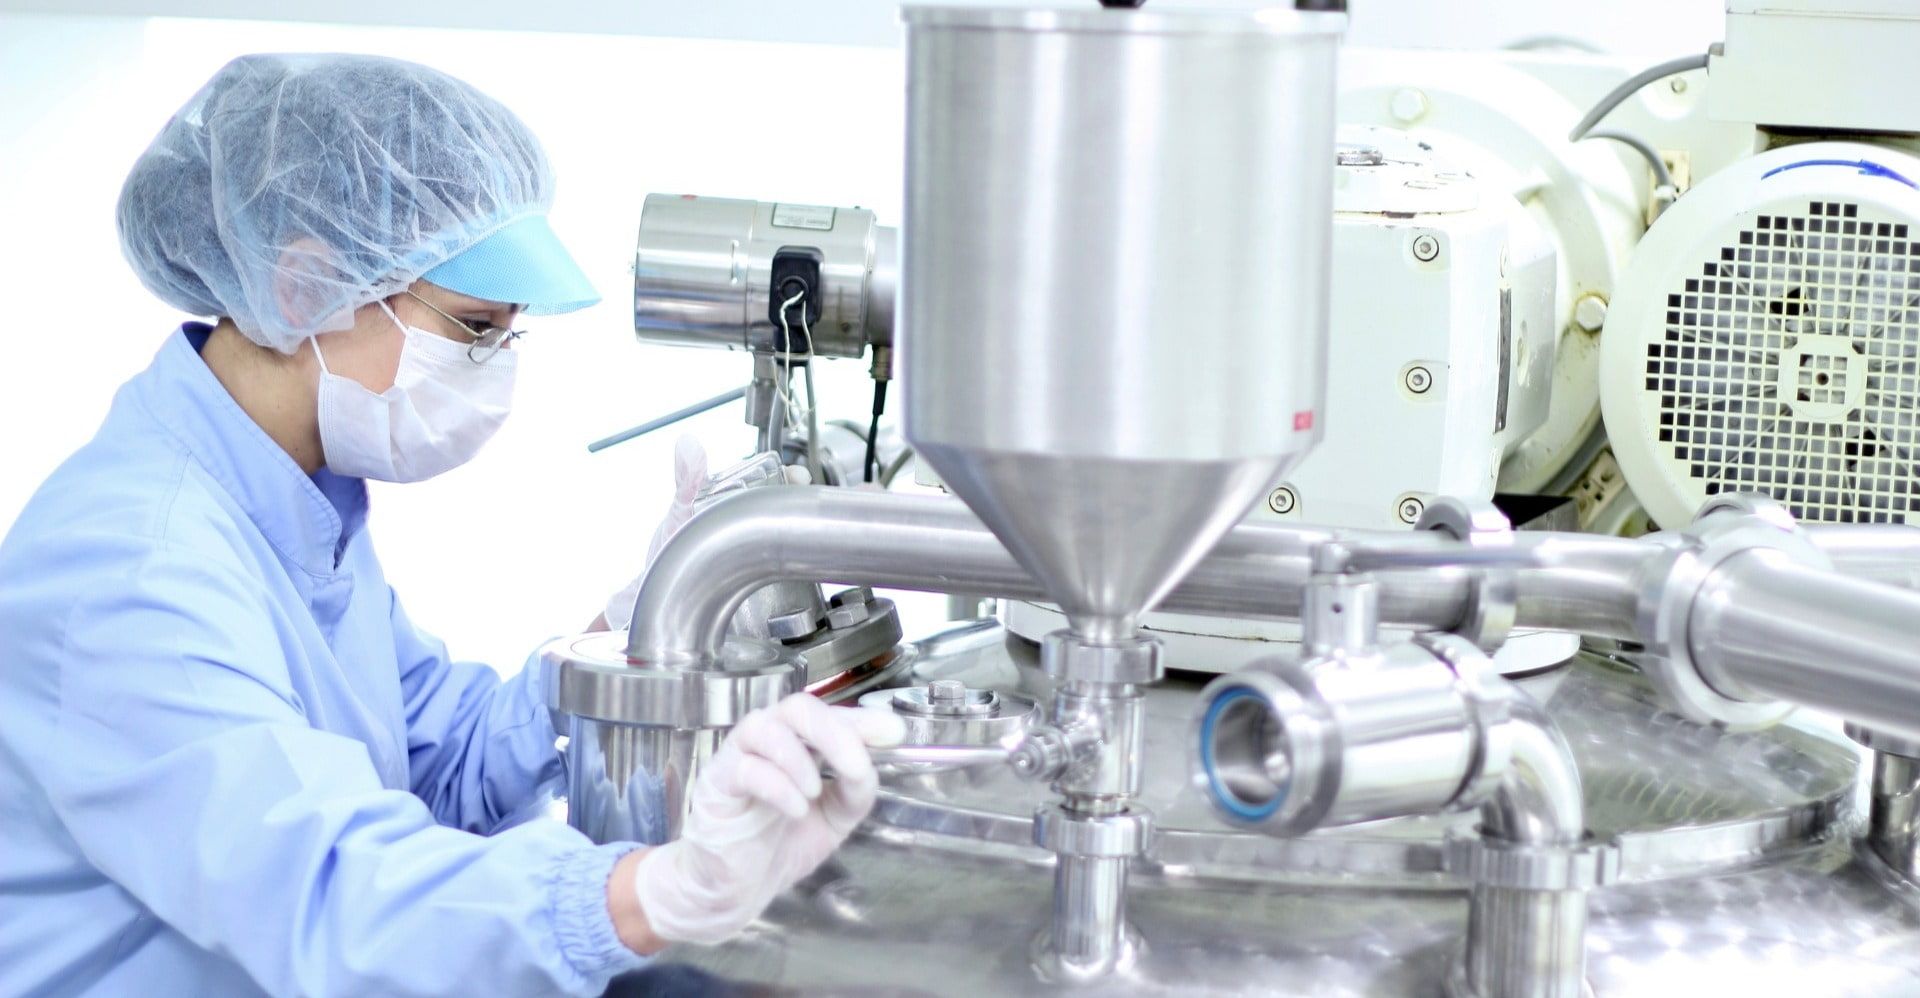 Next Phase recruit people into GMP and ISO clean room manufacturing and production facilities for drug, clinical trial, medical device and cell and gene therapy manufacturing